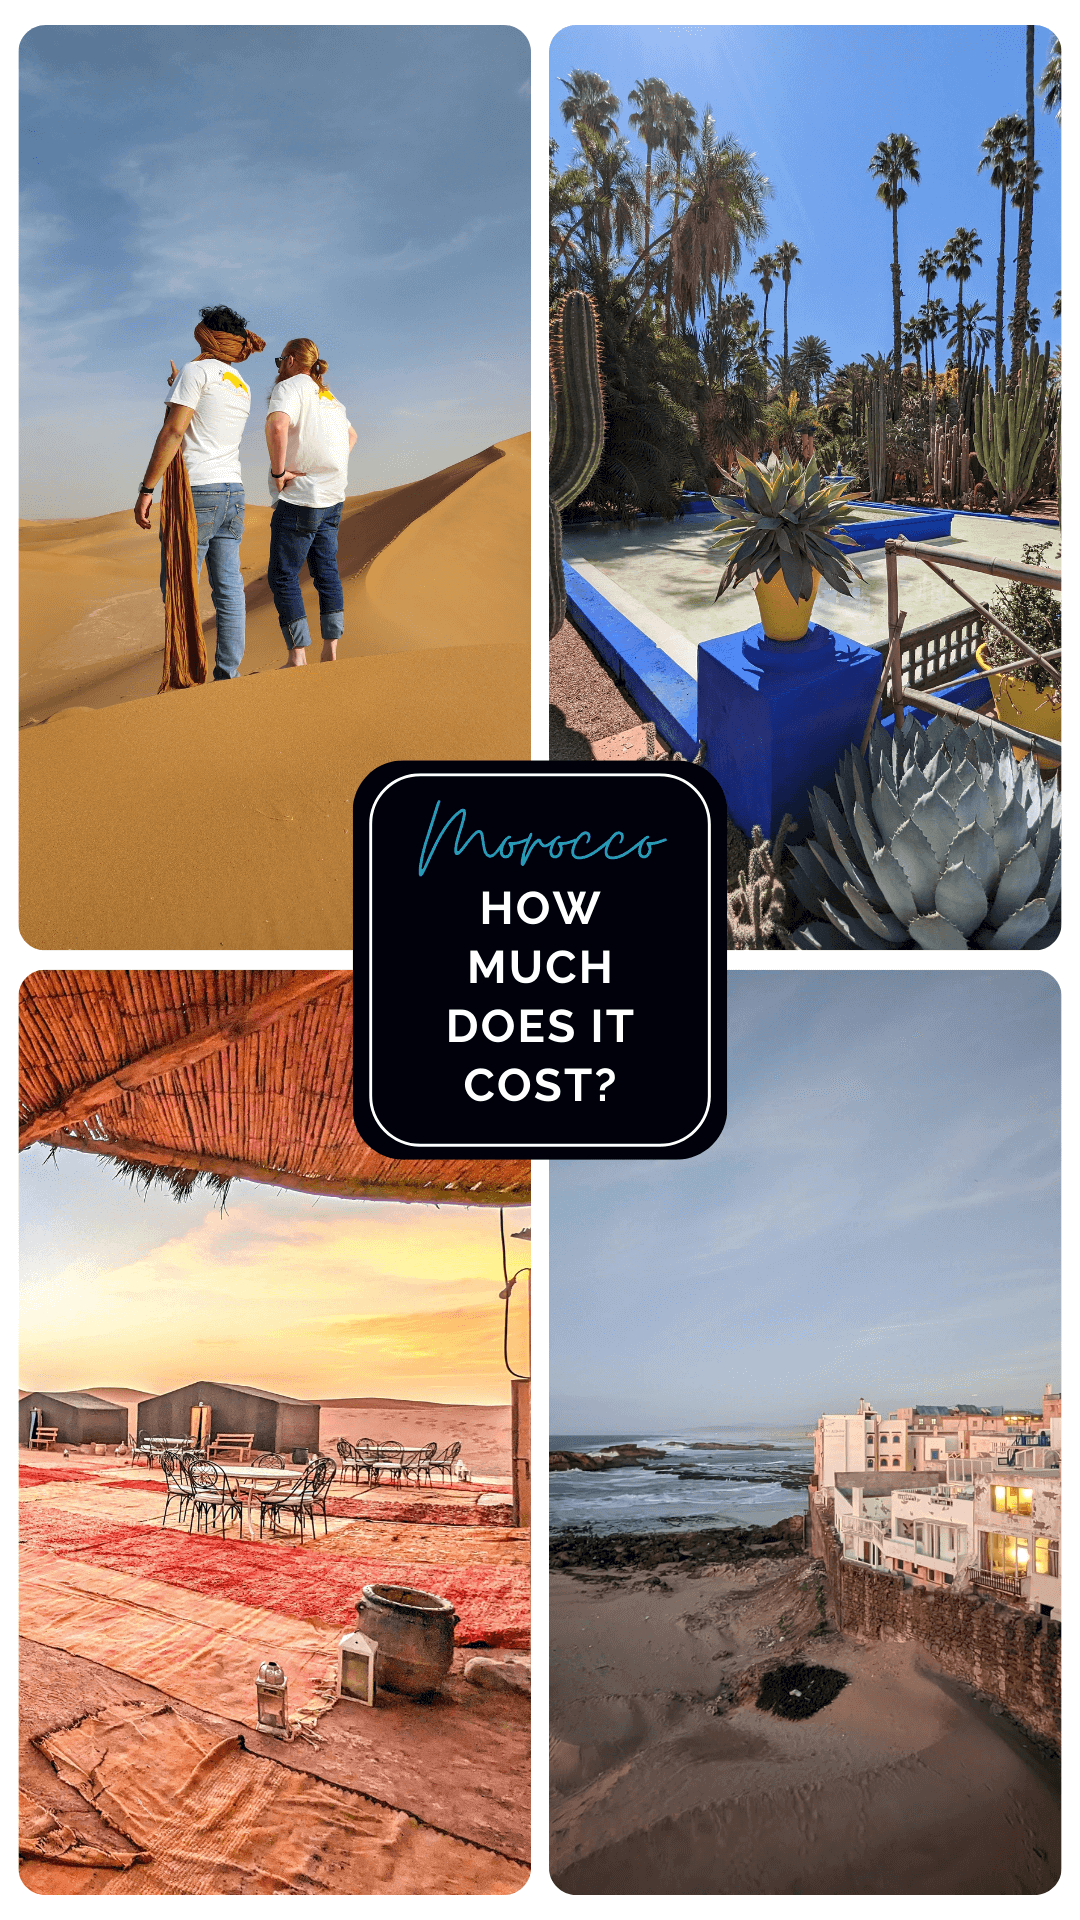 Morocco: How Much Does it Cost